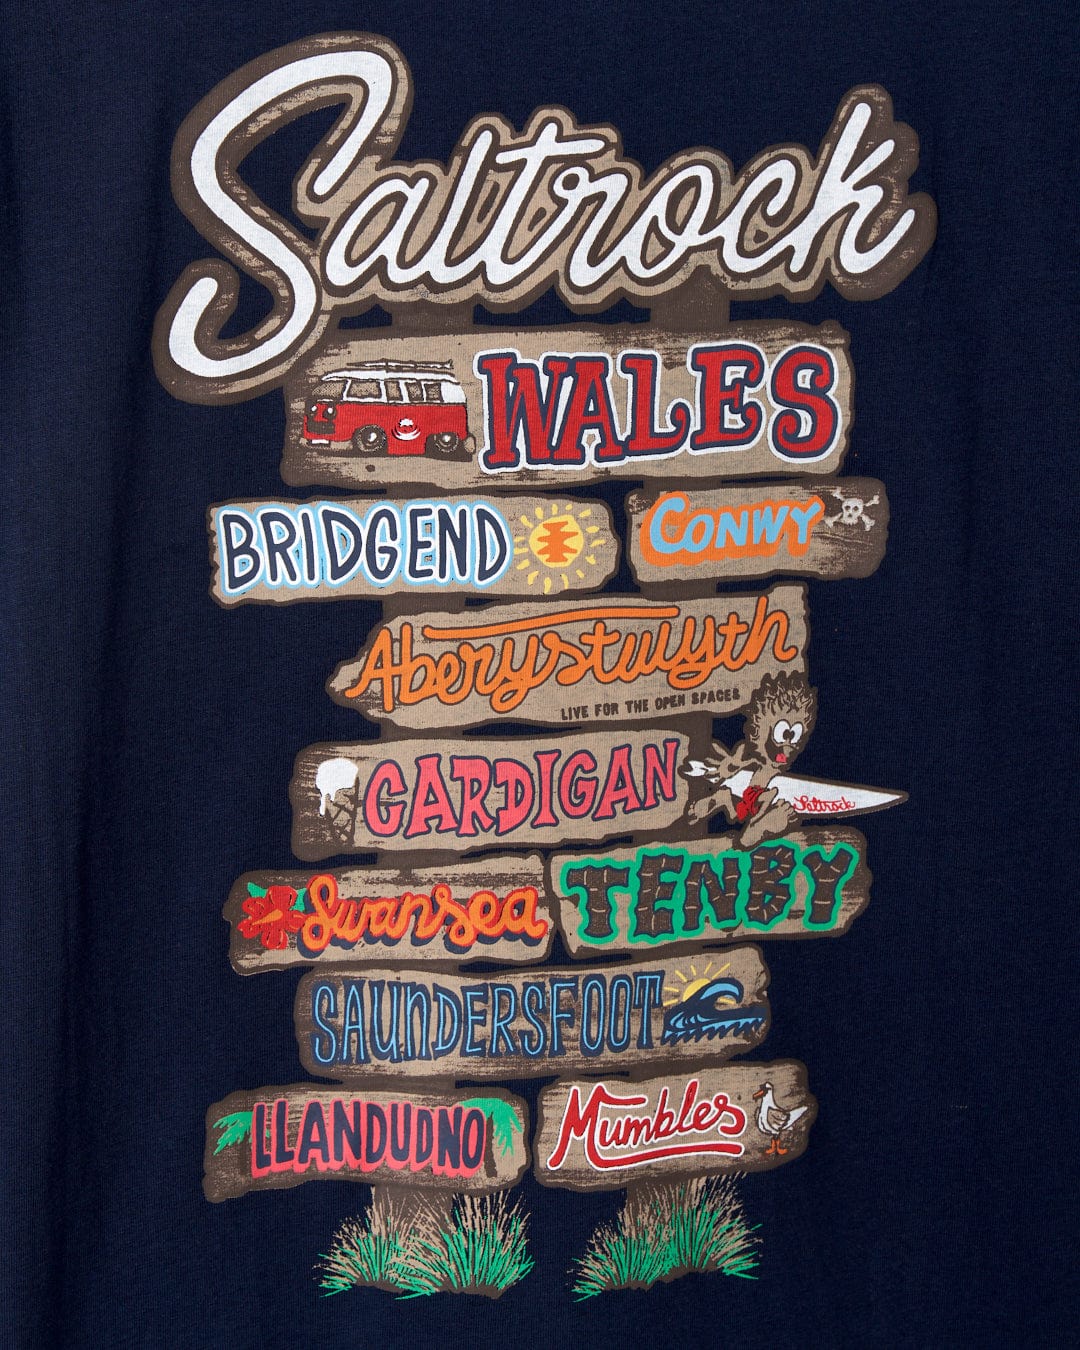 A Beach Signs Wales - Mens Short Sleeve T-Shirt - Blue with the Saltrock branding and soft hand feel finish, featuring beach signs.